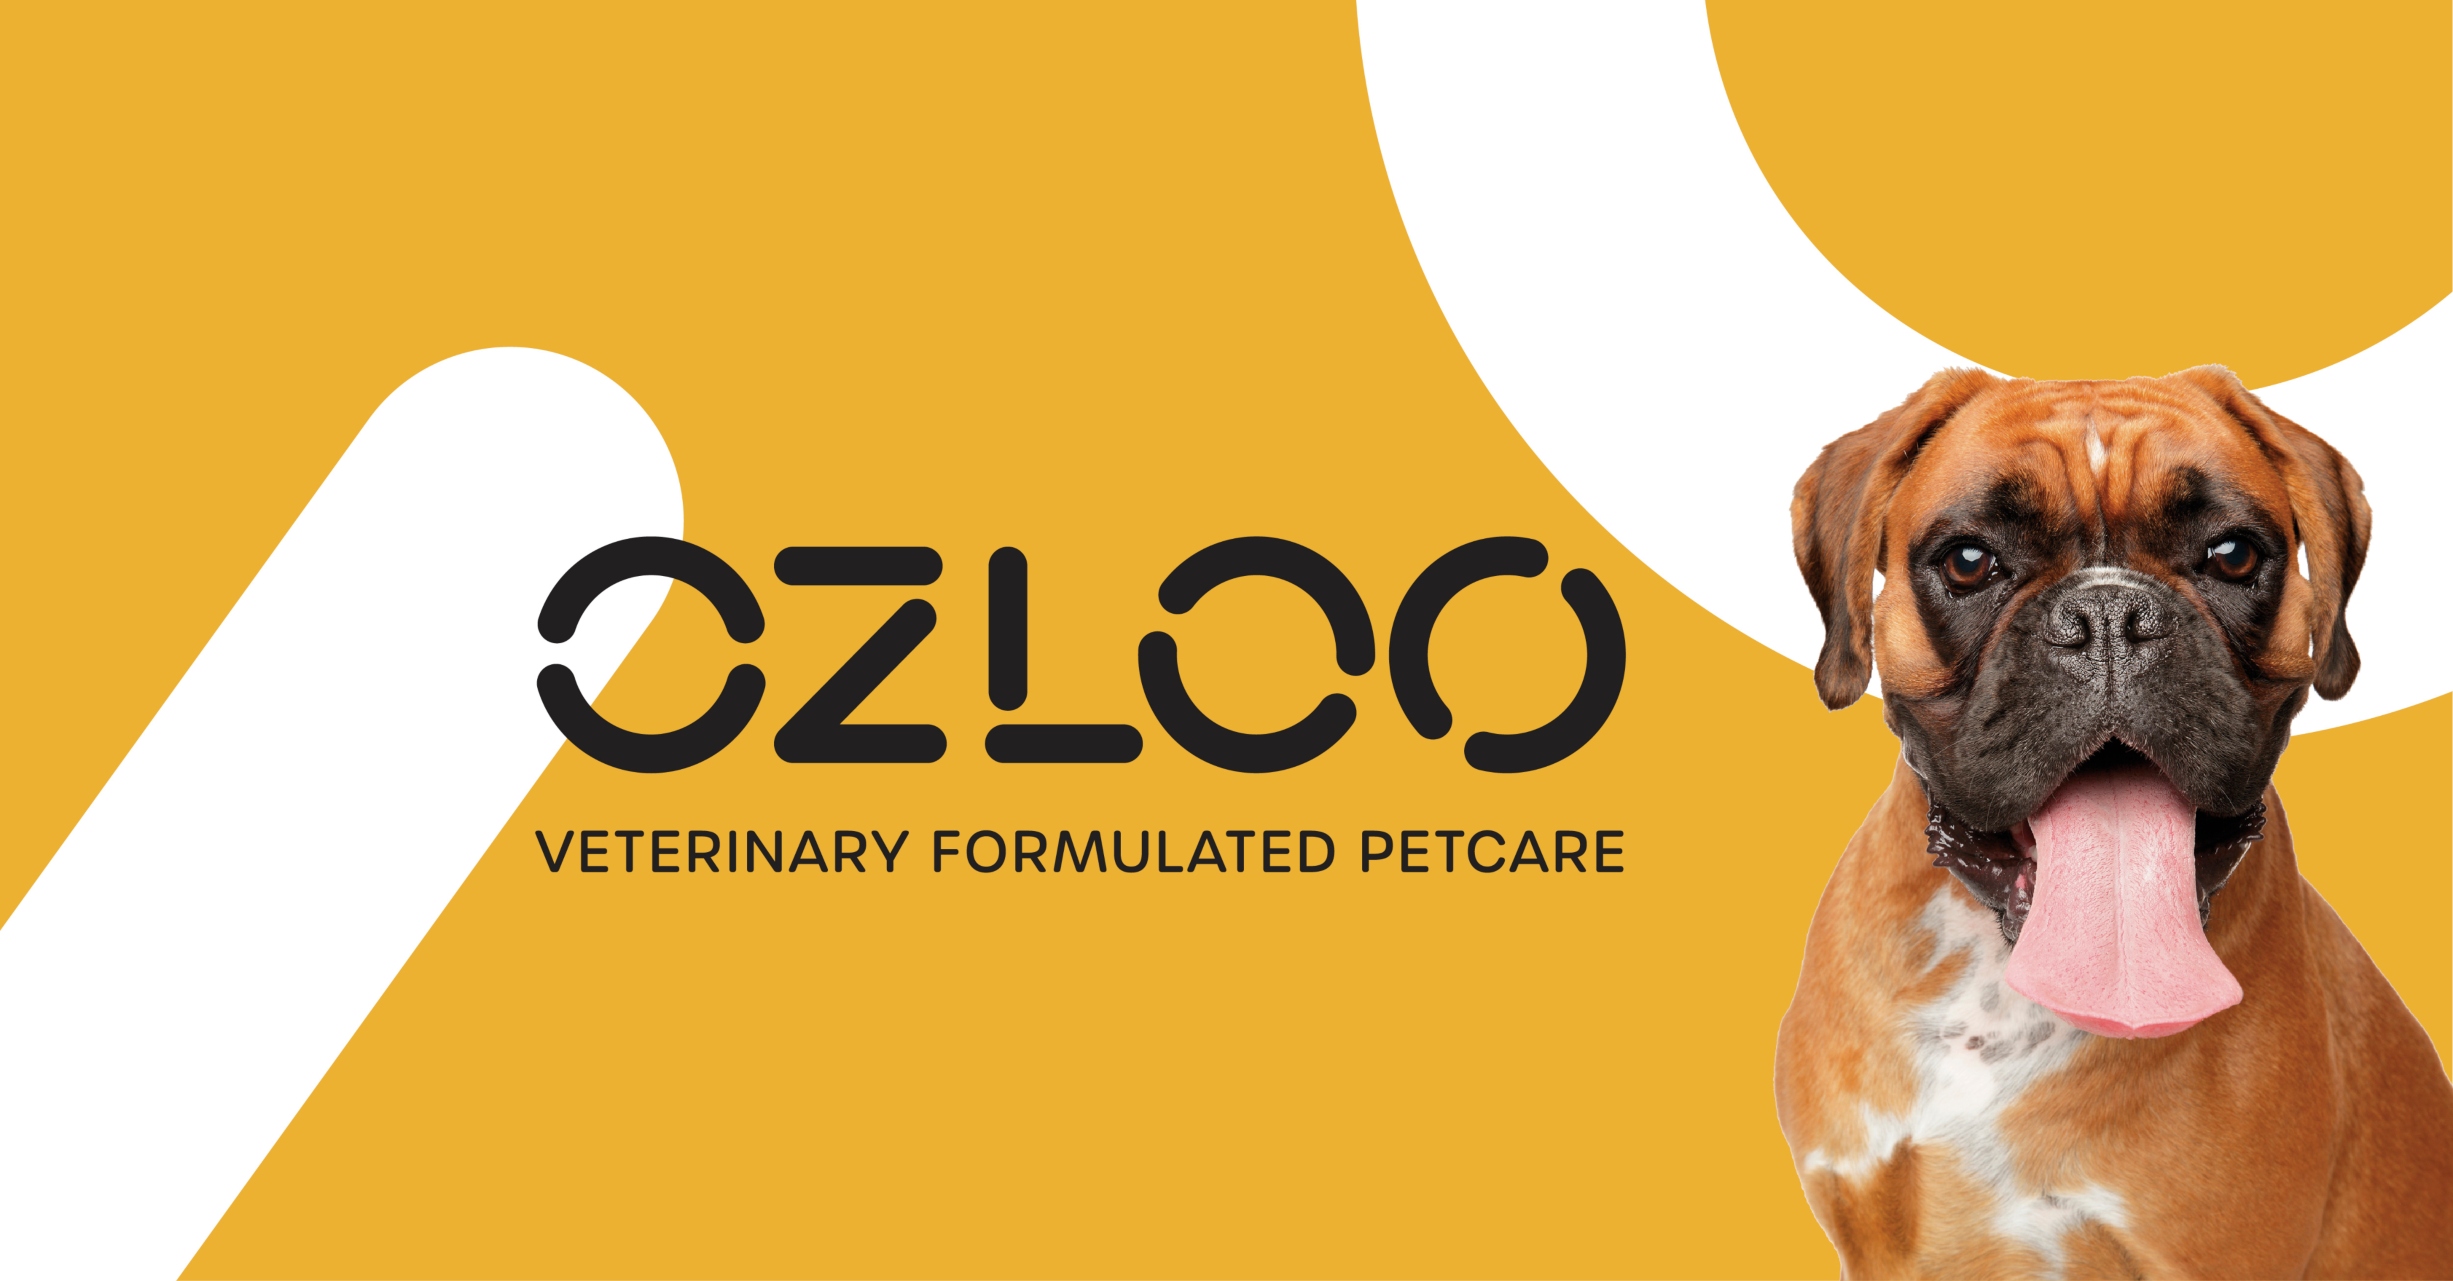 Ozloo – Creating a Premium Brand in a Market of Rapid Post-Pandemic Growth by IDna Group